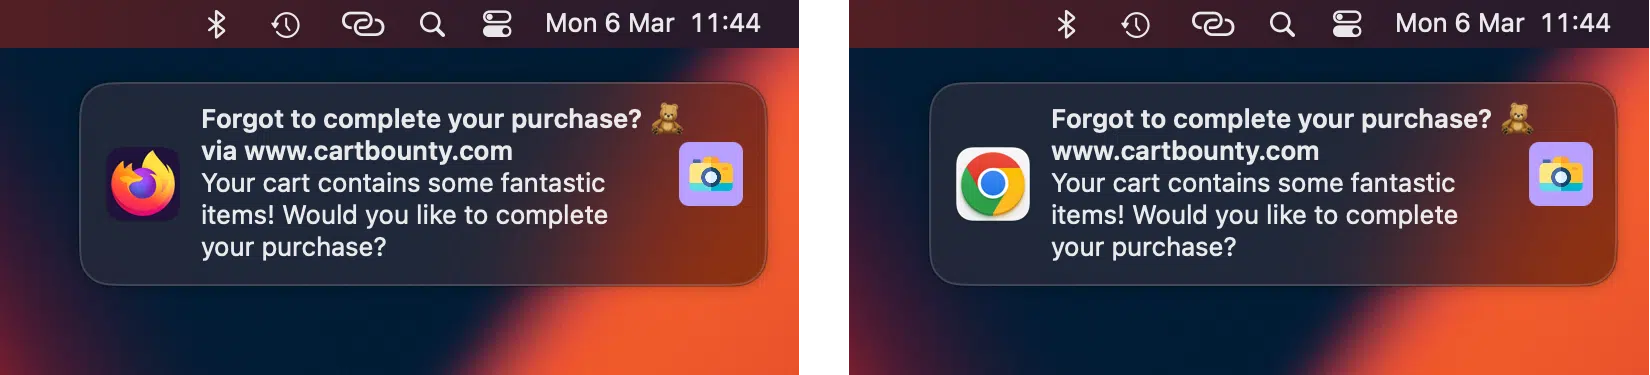 Push notification example on Firefox (left) and Google Chrome (right) in MacOS